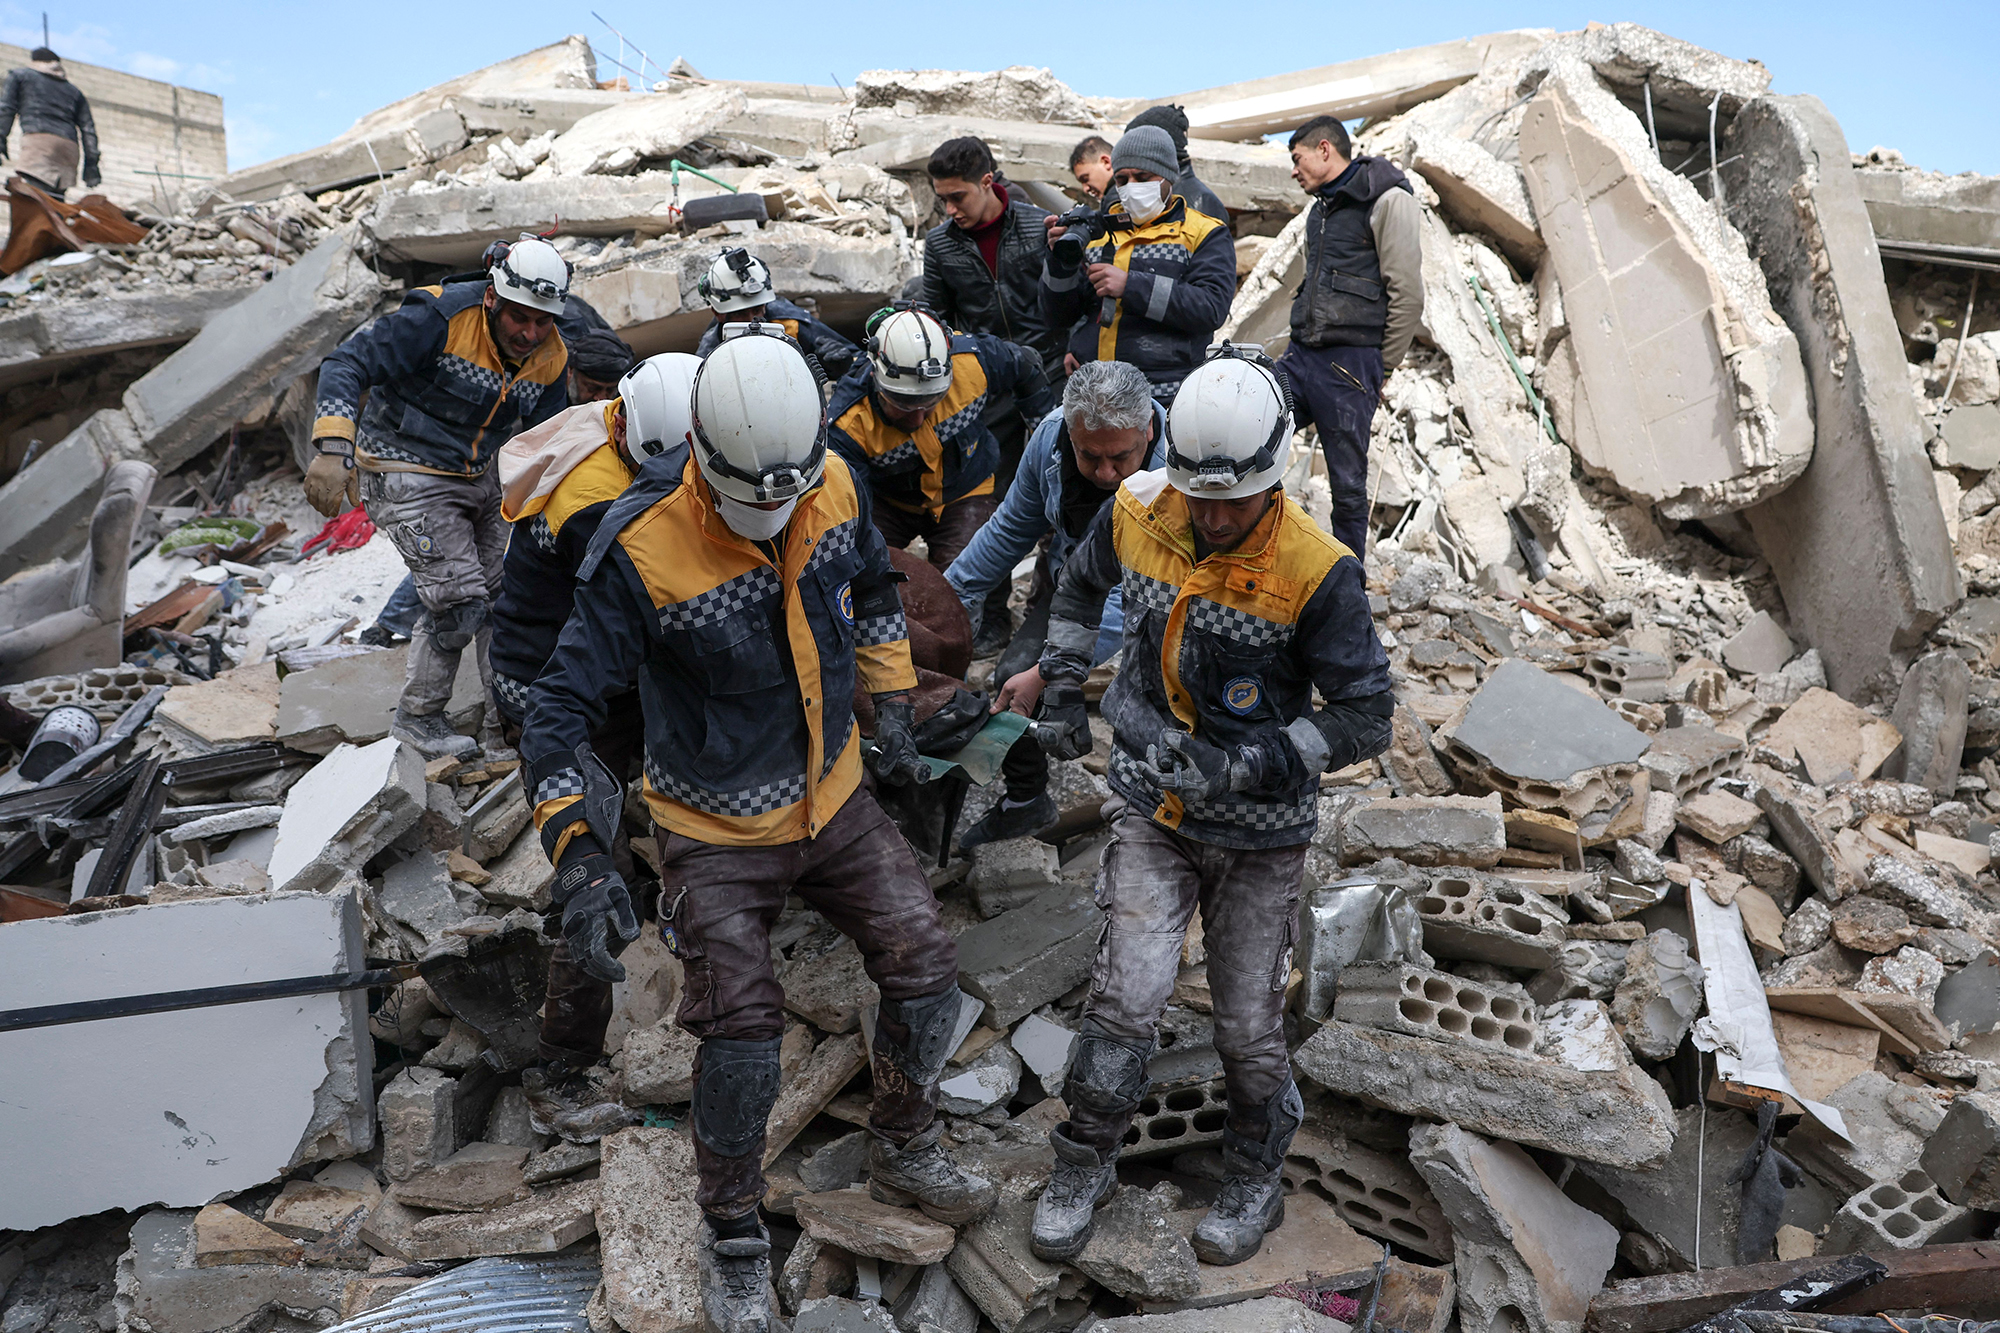 Members of the Syrian civil defence, known as the White Helmets, transport a casualty from the rubble of buildings in the village of Azmarin in Syria's Idlib province on February 7.